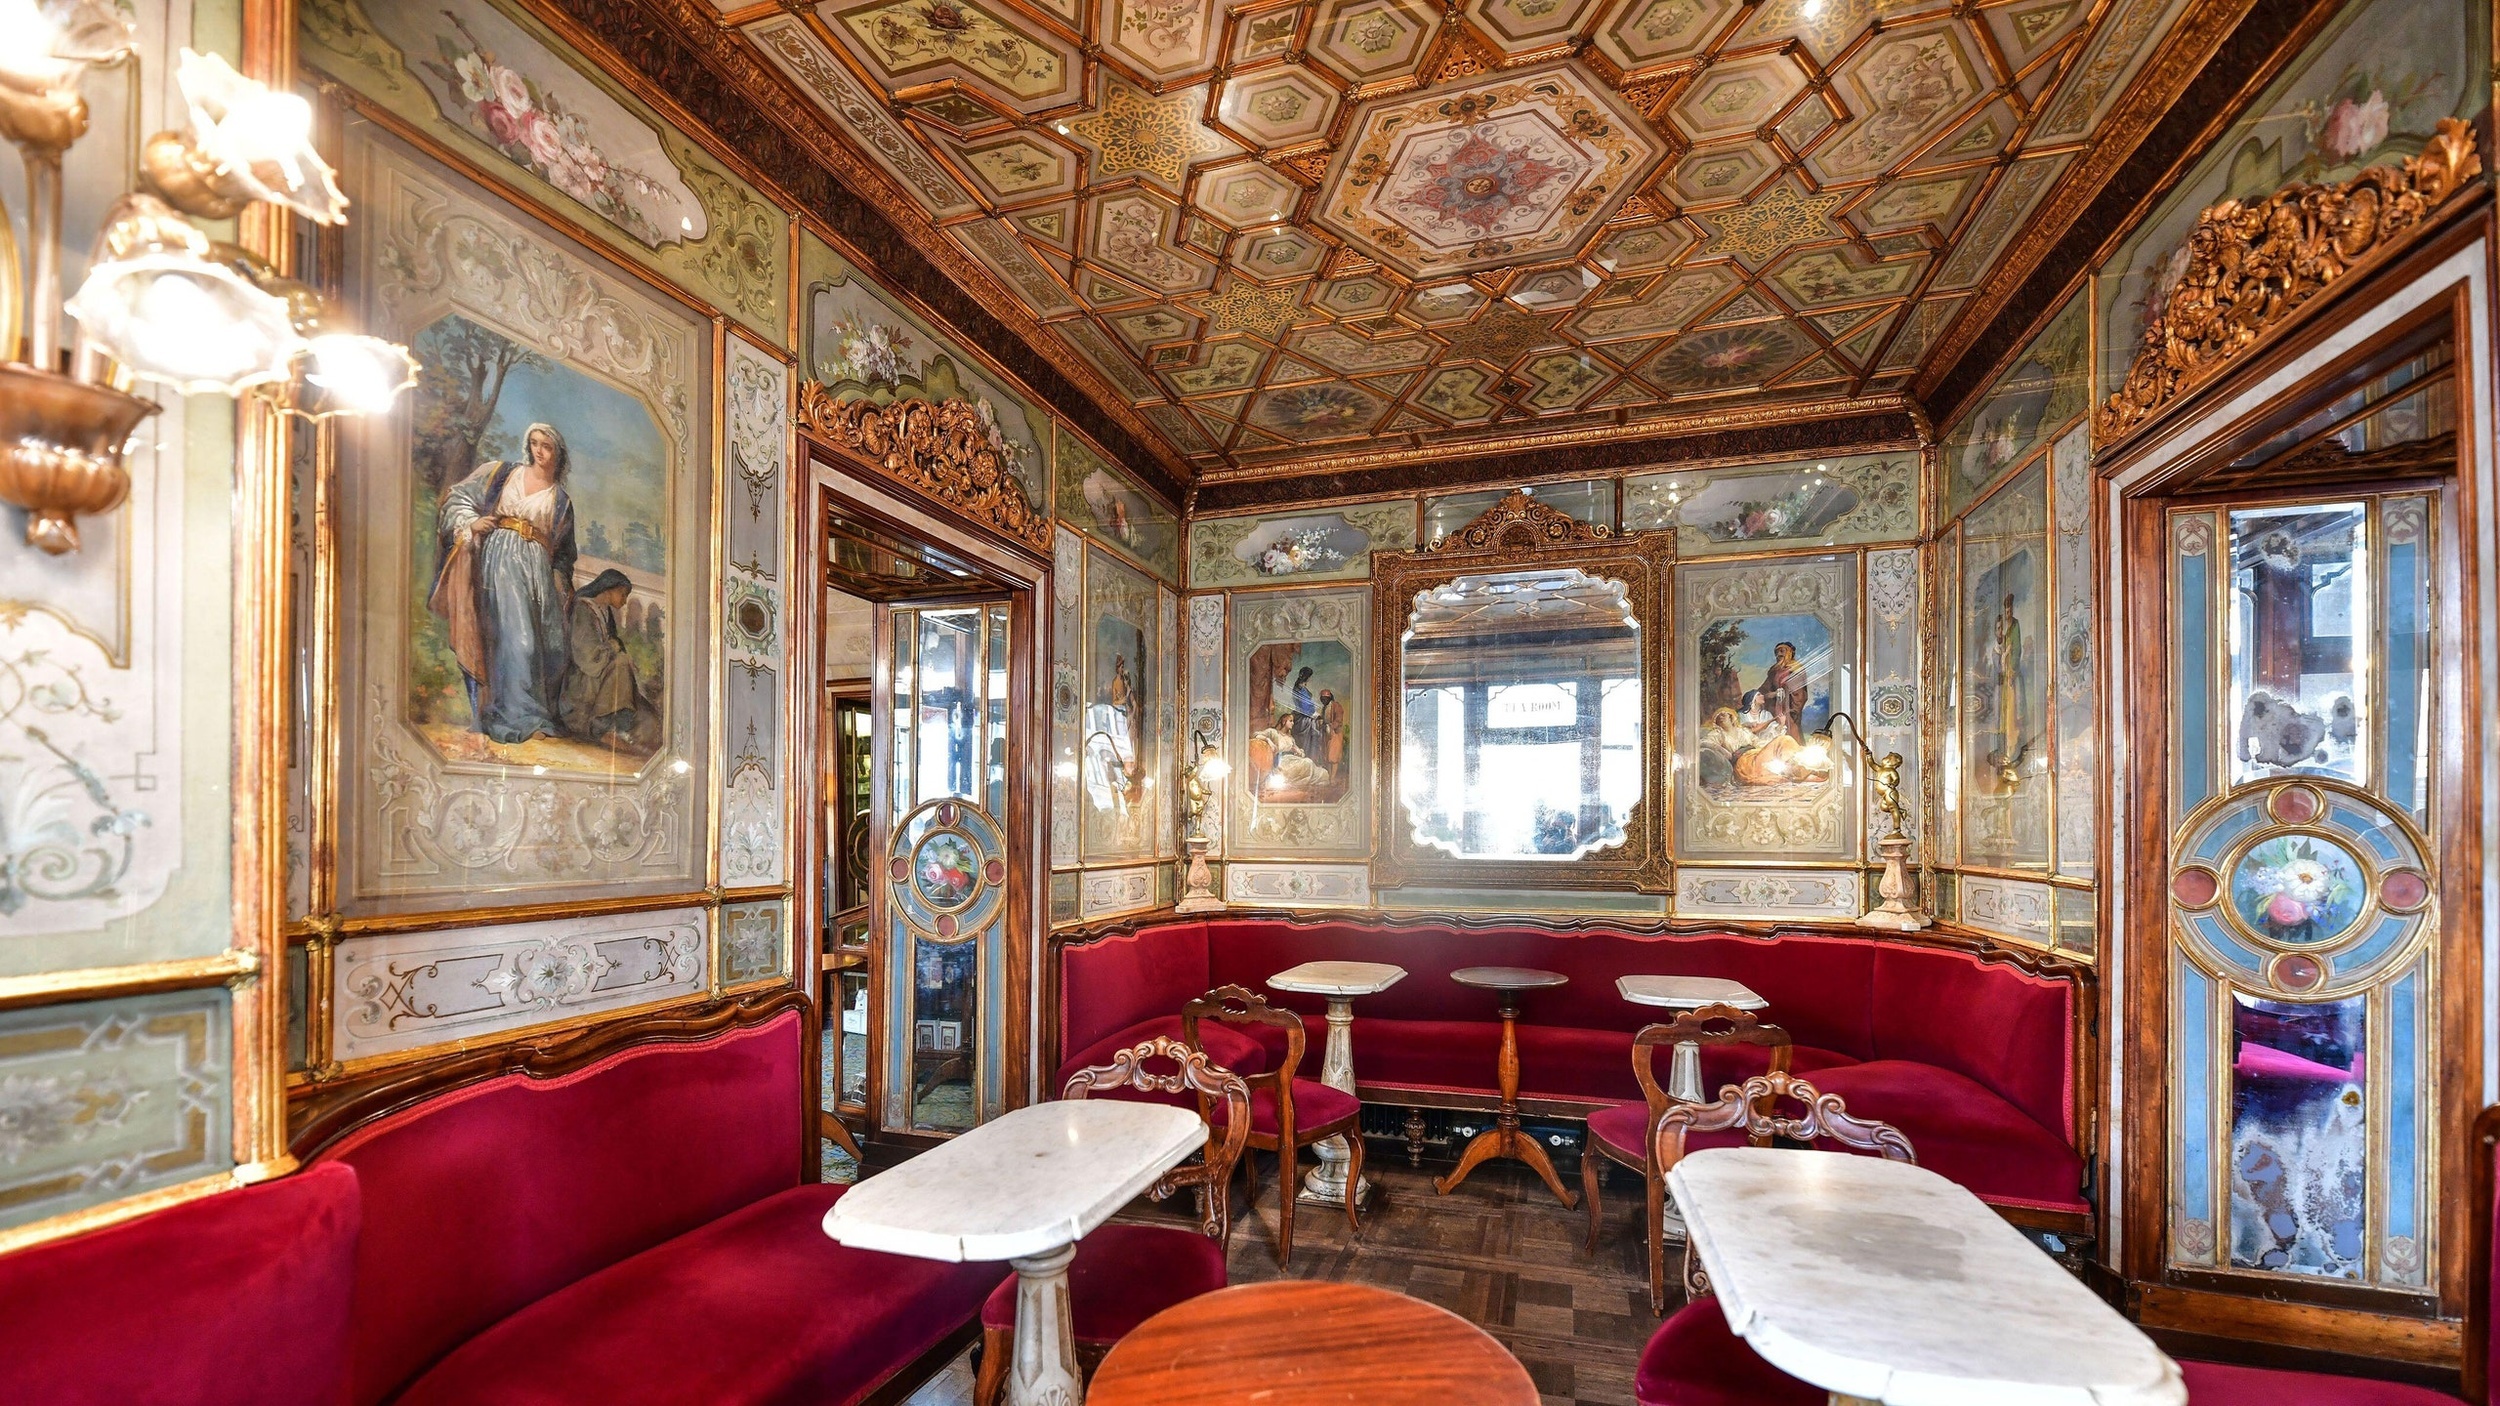 <p>While you're in St. Mark's Square, you'll want to visit Caffe Florian. This iconic Venetian restaurant was once a watering hole for Proust, Dickens, and Casanova, and the decor hasn't changed much over the years. My advice: enjoy an espresso in the same seat Dickens once enjoyed a beer. </p><p>You may also like: <a href='https://www.yardbarker.com/lifestyle/articles/20_essential_things_to_know_before_you_start_composting_031524/s1__36137261'>20 essential things to know before you start composting</a></p>